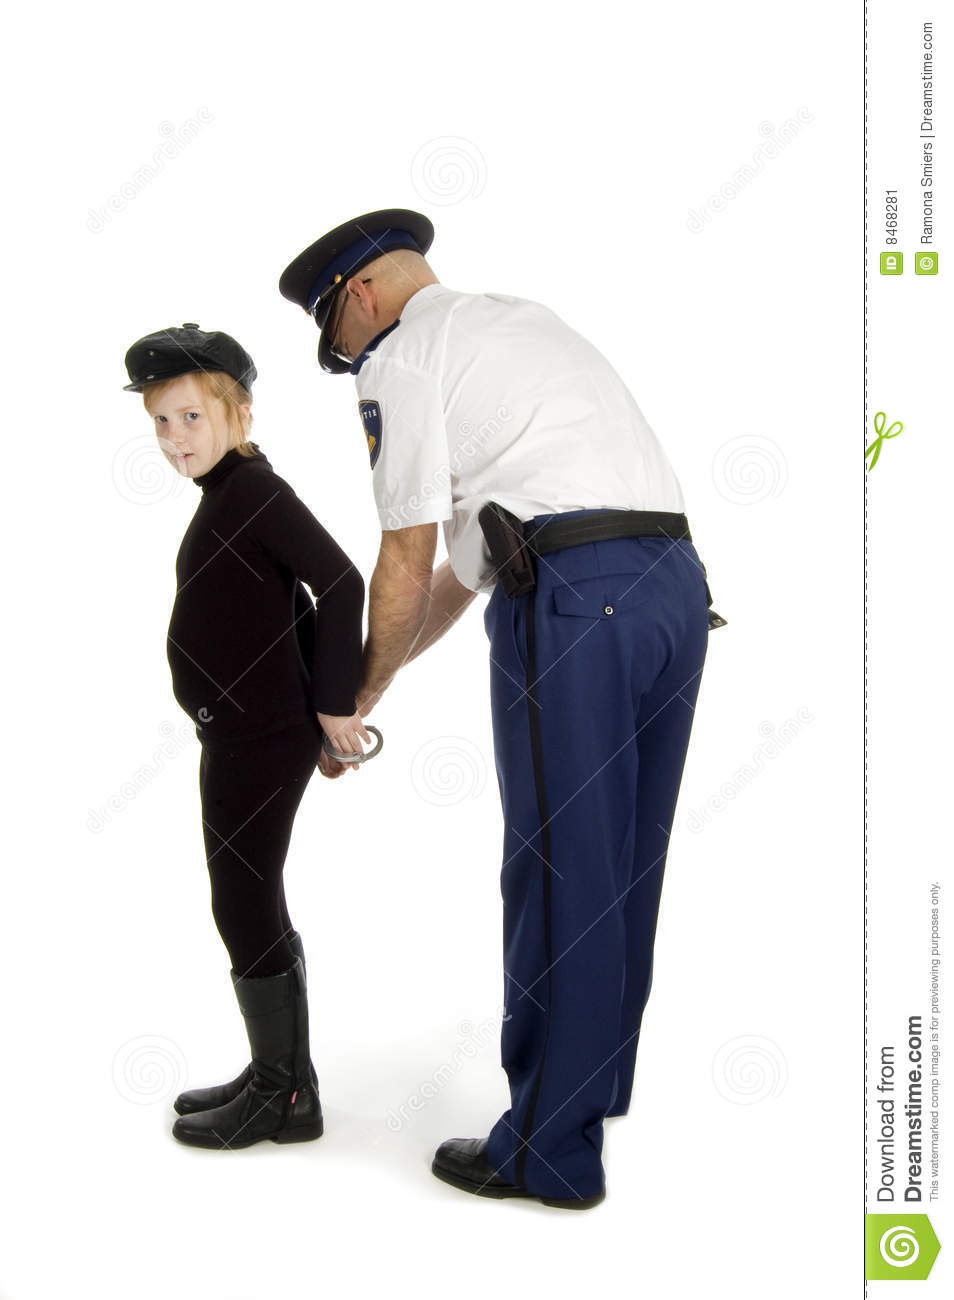 Juvenile Is Been Arrested By A Dutch Police Officer On White